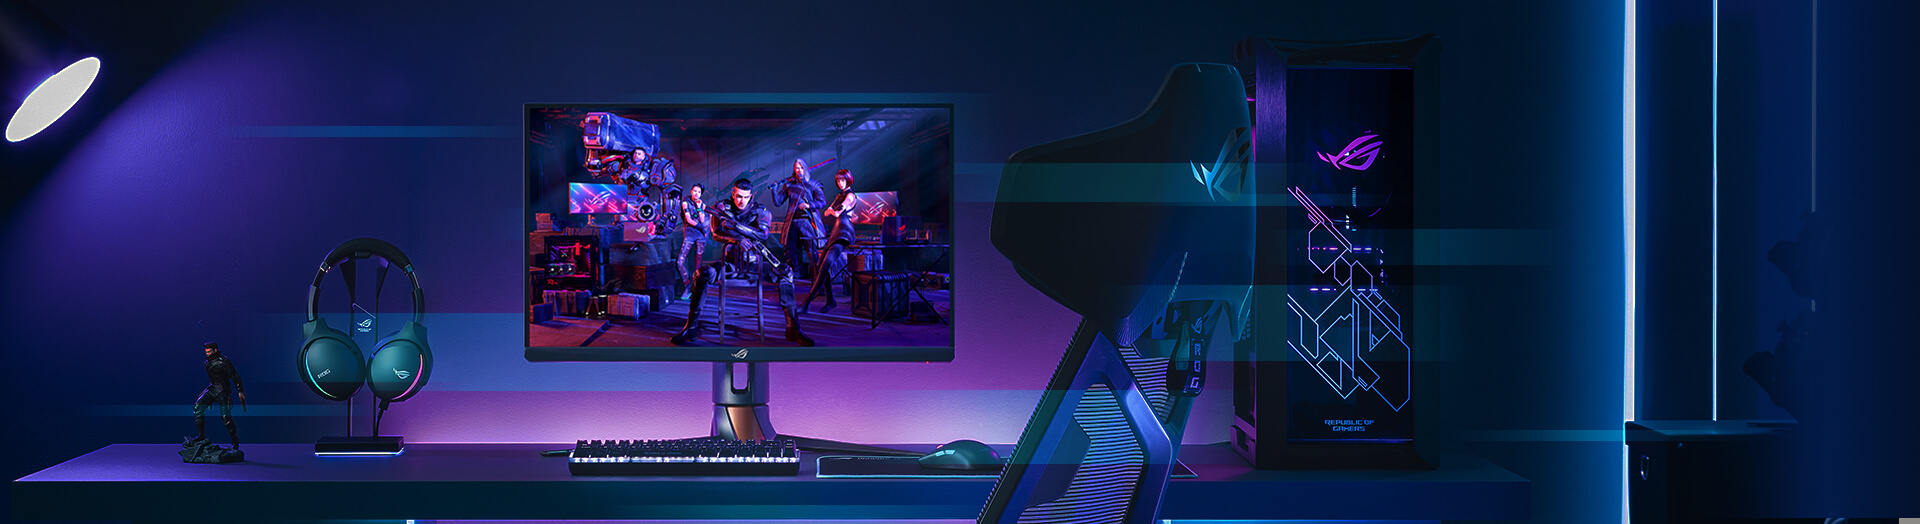 the ROG esports gaming monitor within a complete gaming setup with blue and purple backliight coming from behind